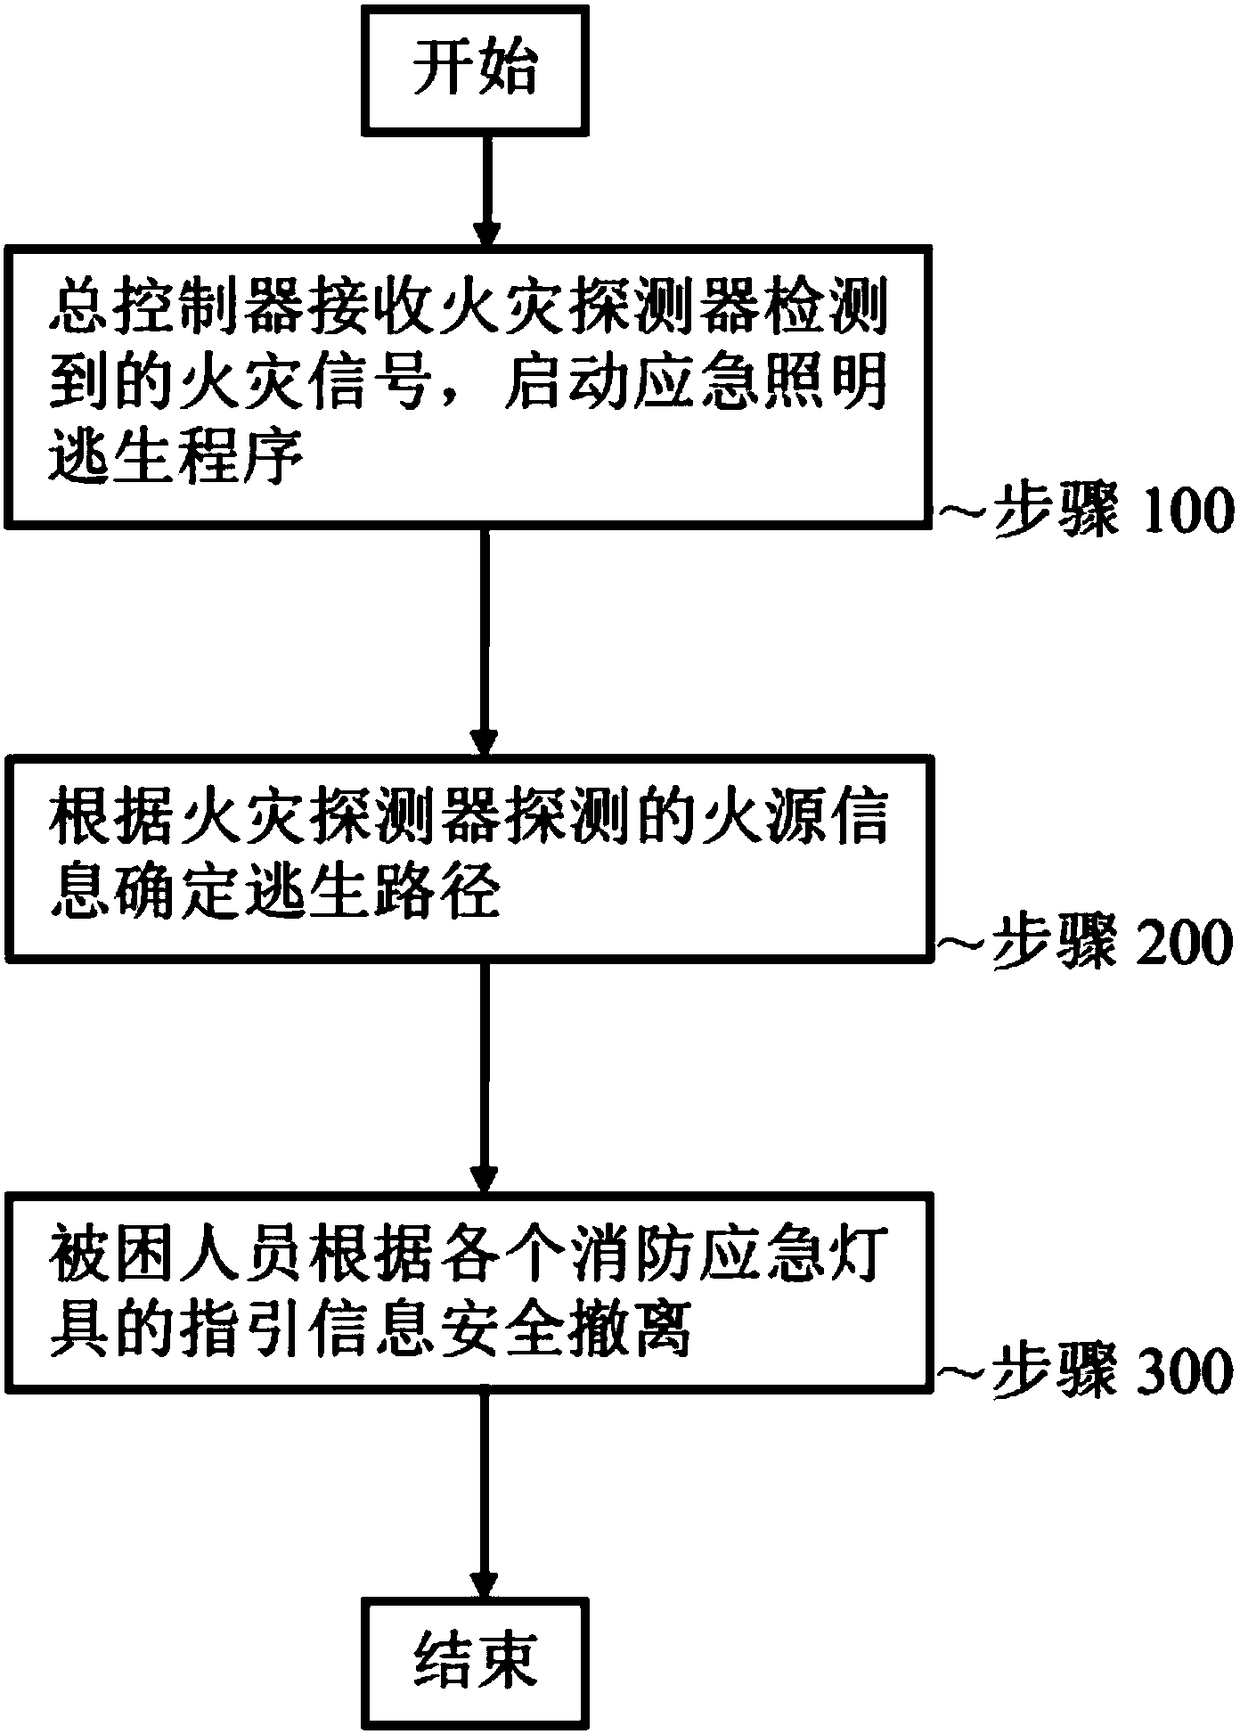 Emergency lighting and evacuation indication detection system and method